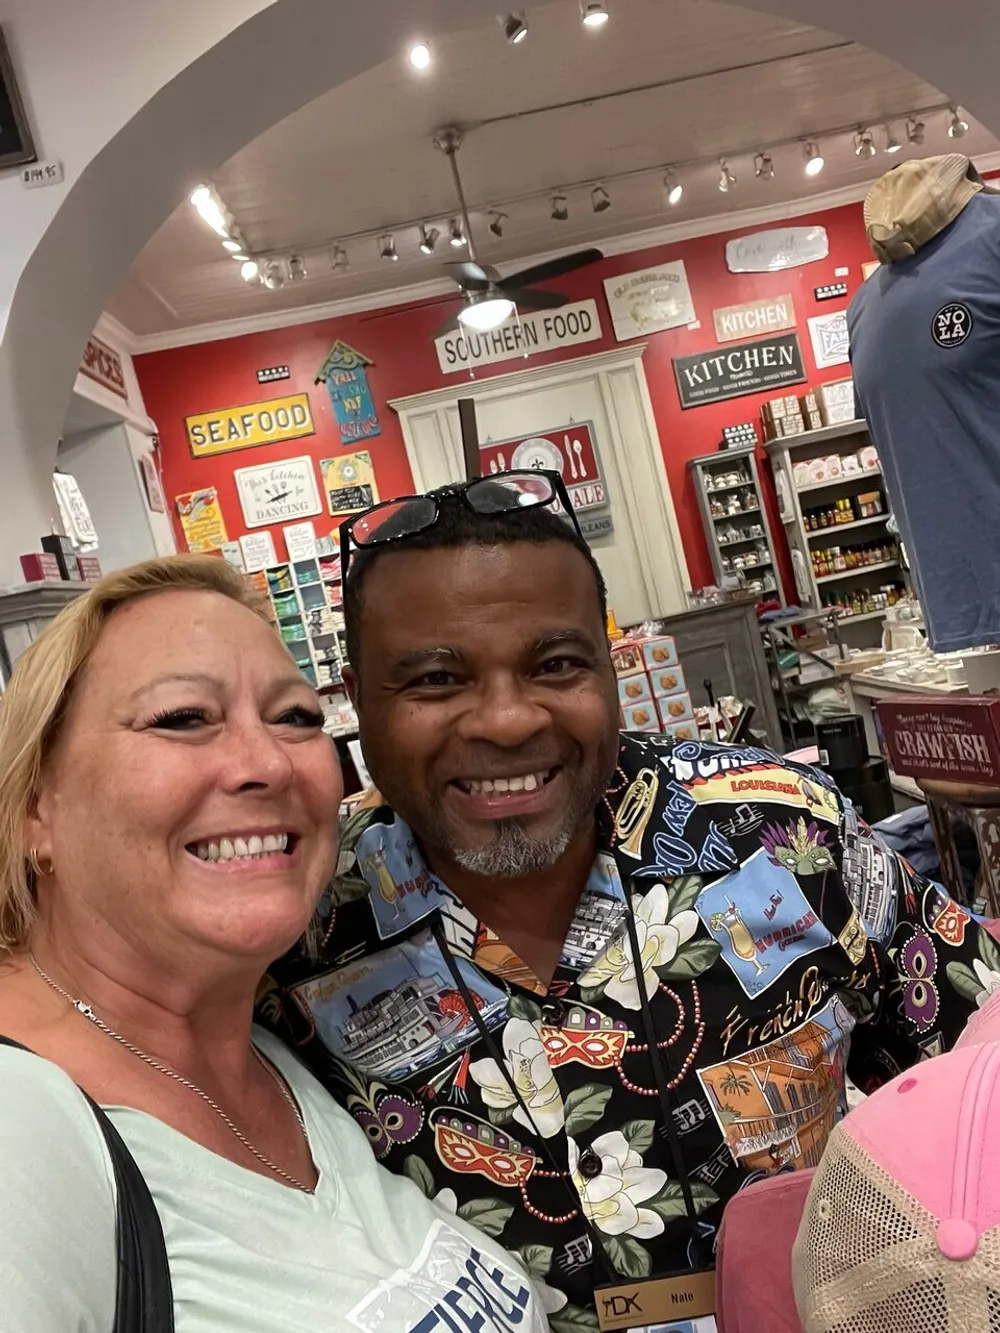 A man and a woman are smiling for a selfie inside a store with colorful dcor and merchandise that suggests a theme related to Southern or New Orleans cuisine and culture